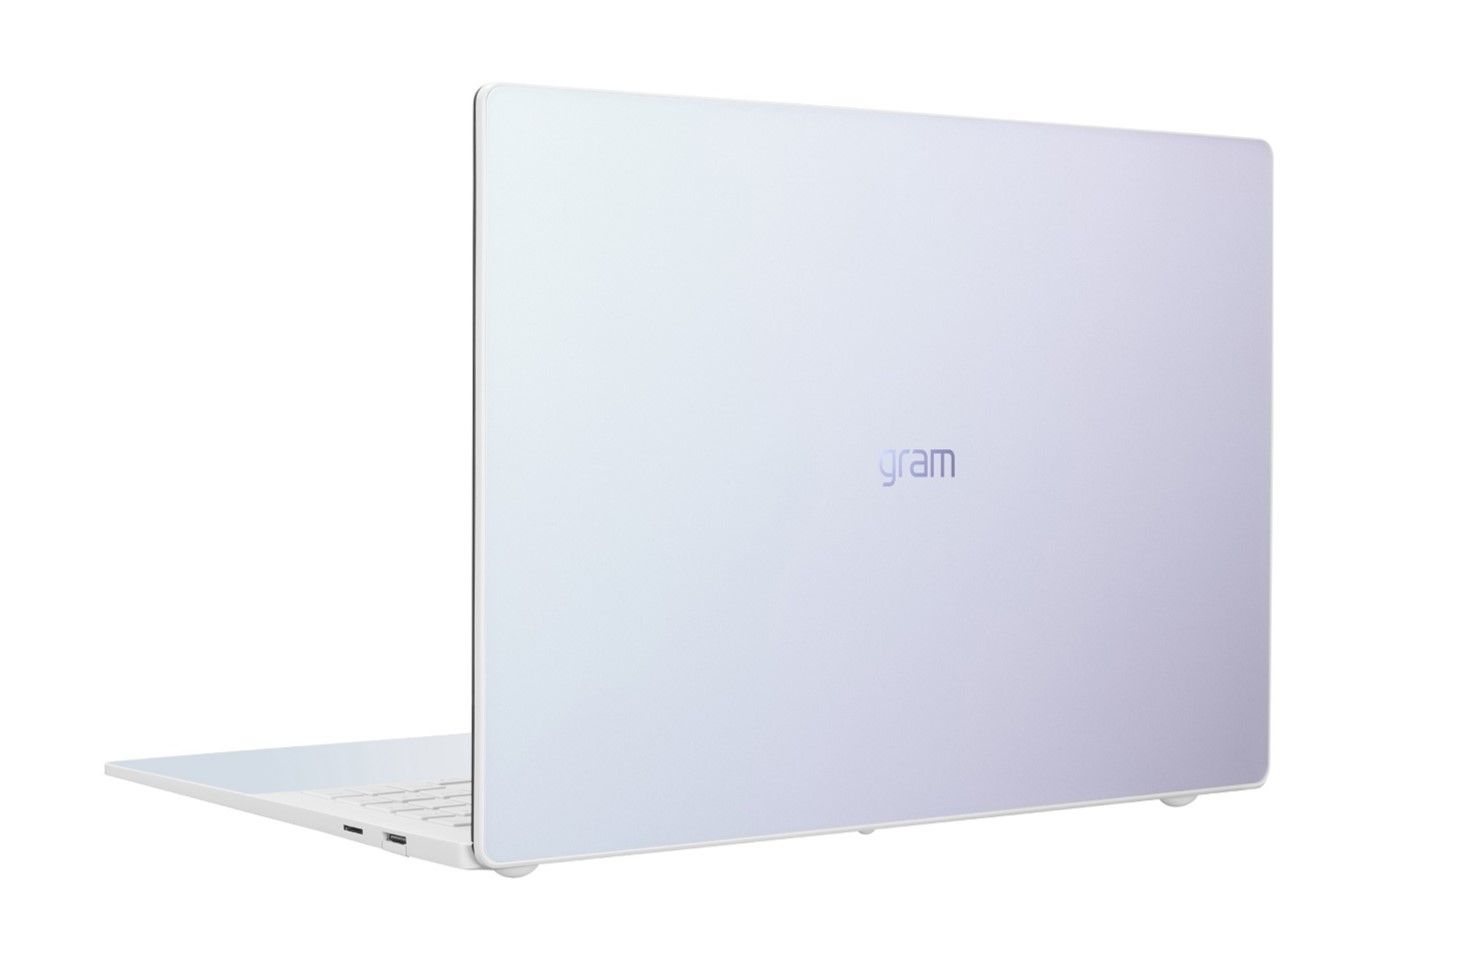 Angled rear view of the LG gram Style laptop in white facing left. The lis is shown with a slight colorful sheen, appearing purple toward the bottom right corner due to the way light reflects off of it.